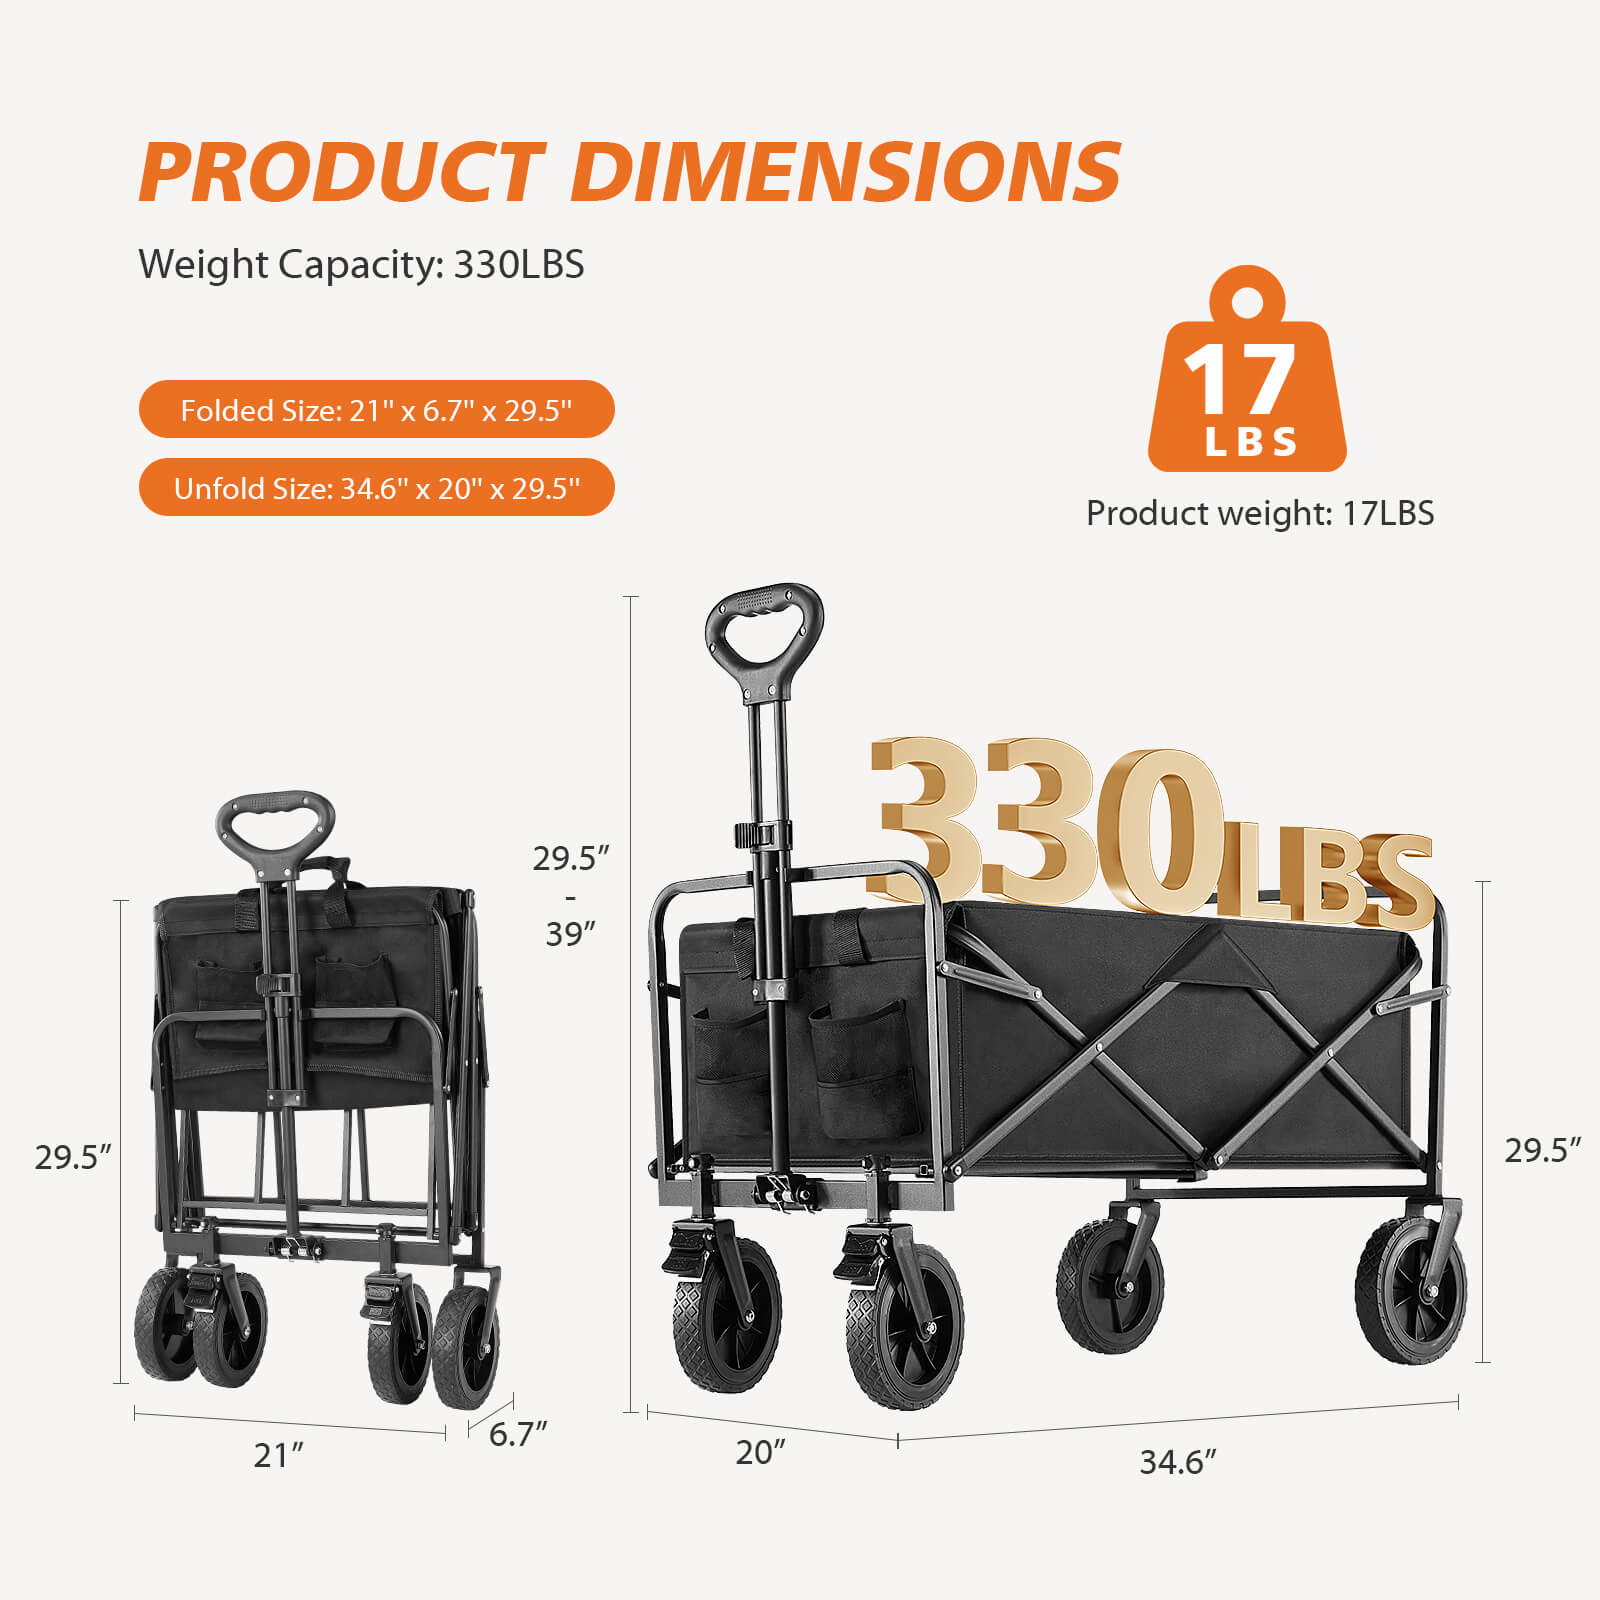 Wagons Carts Foldable with All-Terrain Wheels - foldable, extra large capacity, with drink holder, Suitable for Camping Sports Outdoor Activities